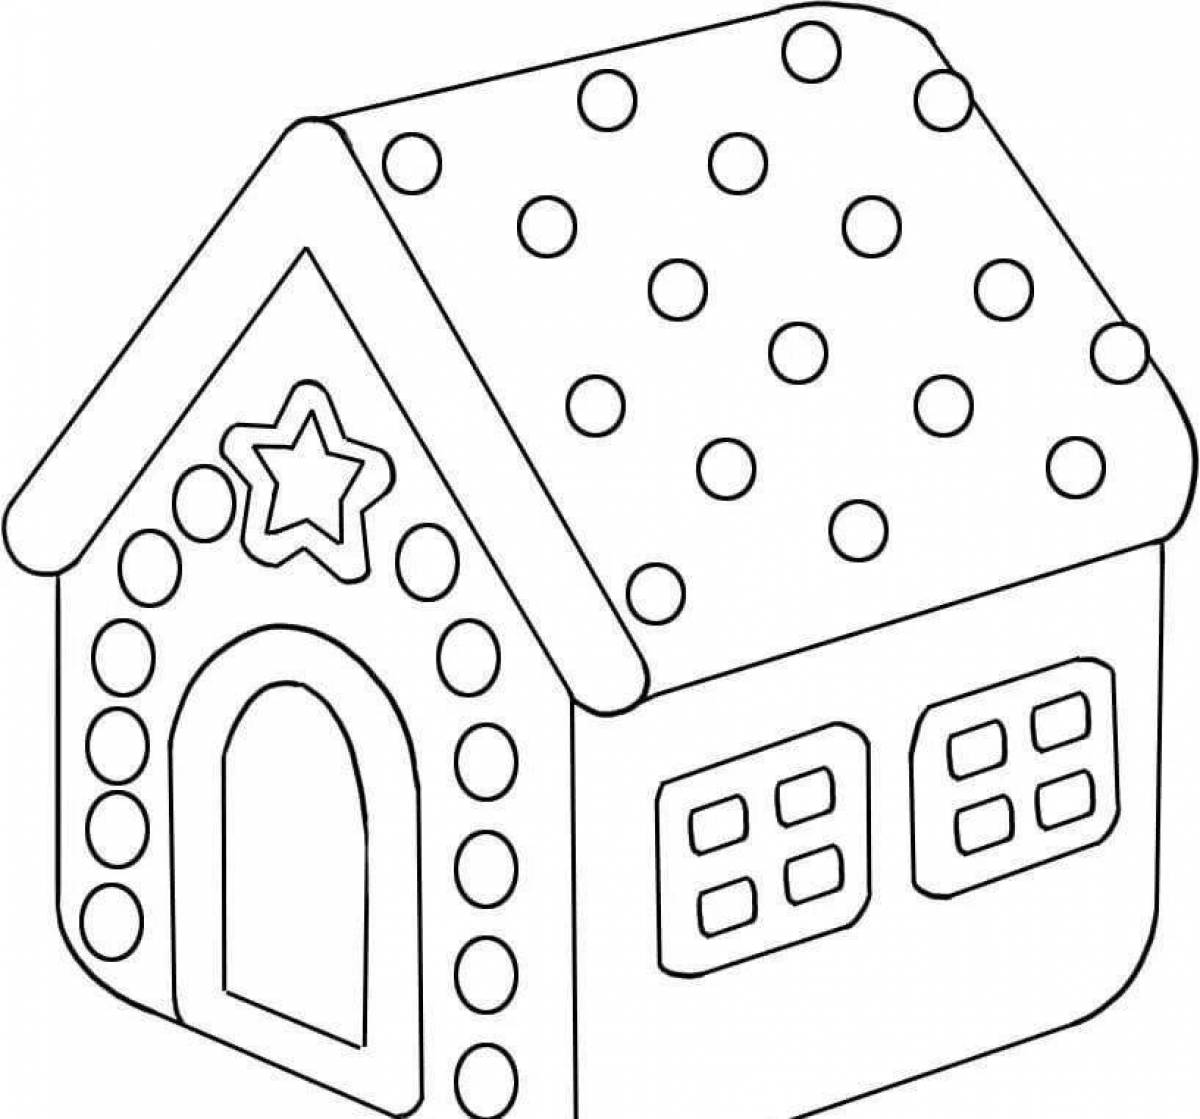 Amazing house coloring book for toddlers 2-3 years old